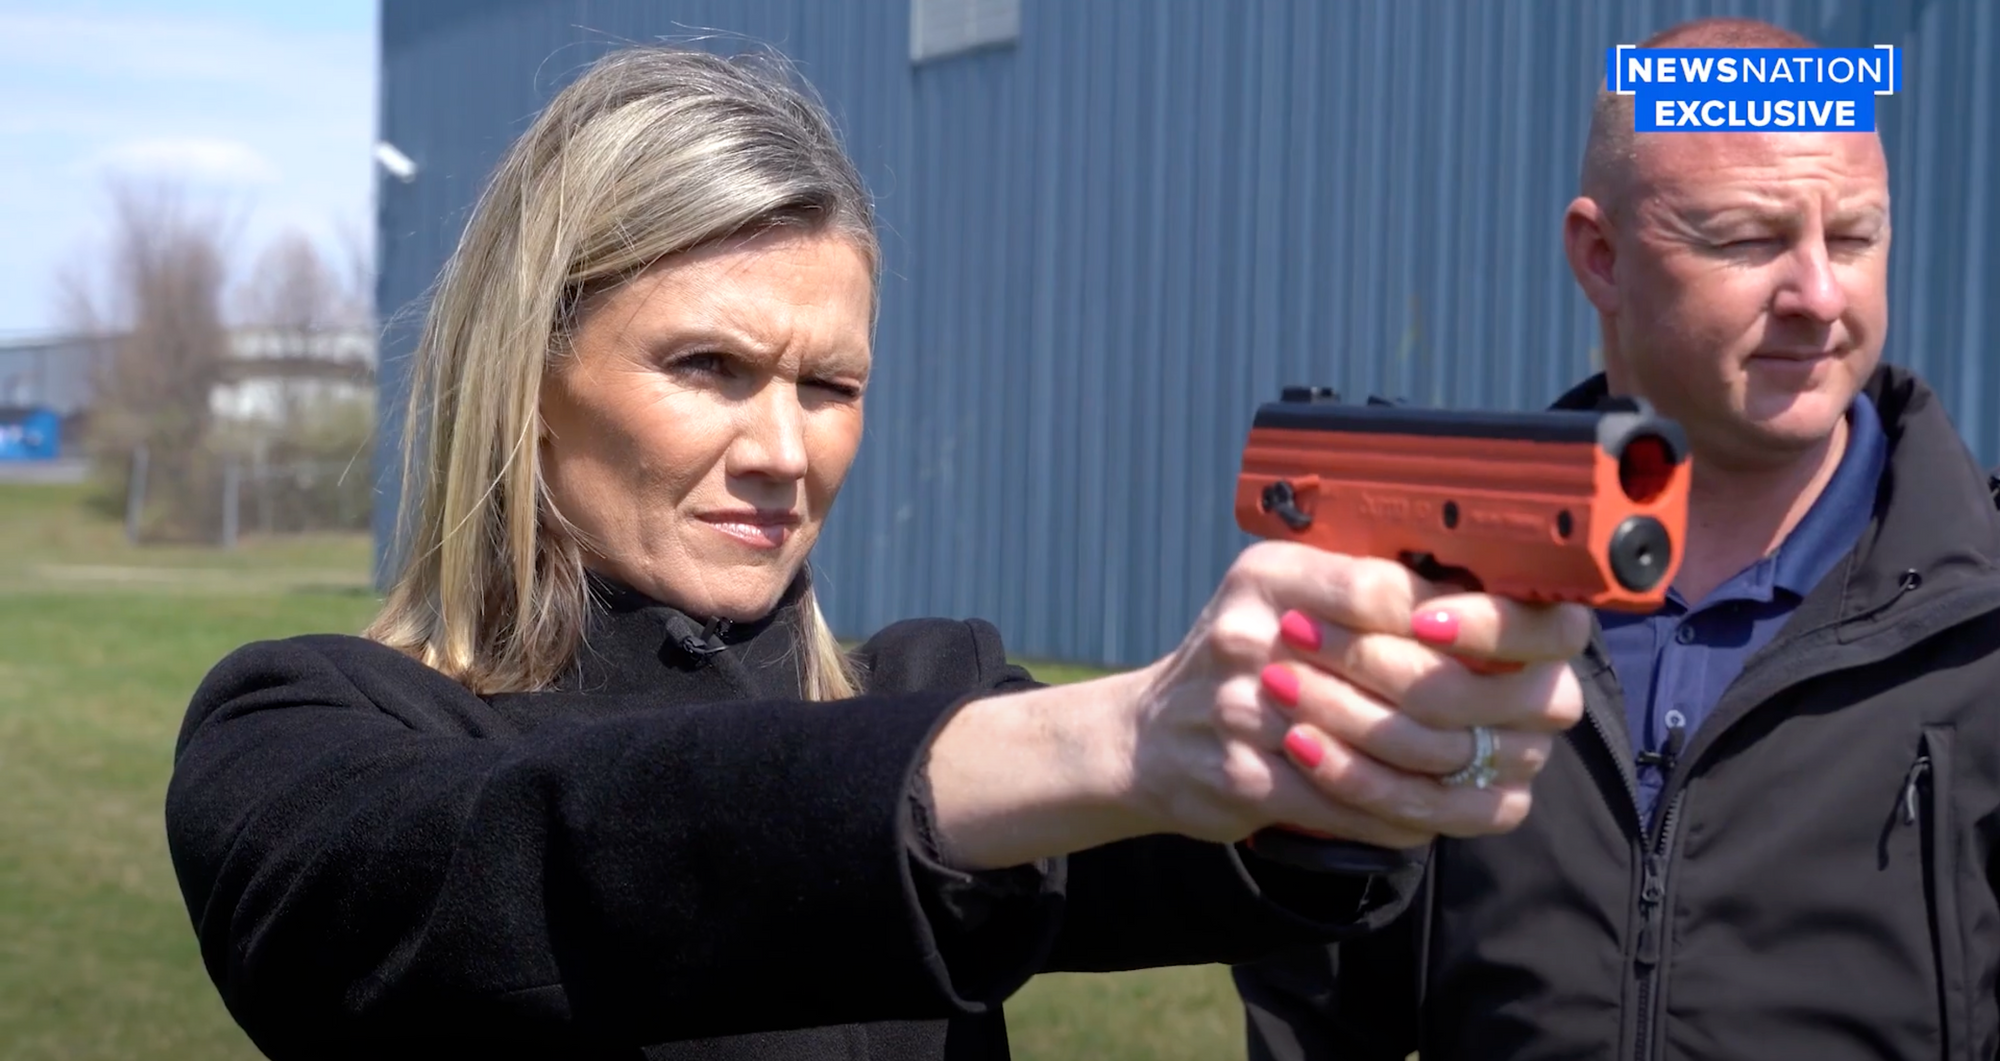 NewsNation: "Less-lethal guns offer alternative to traditional firearms"